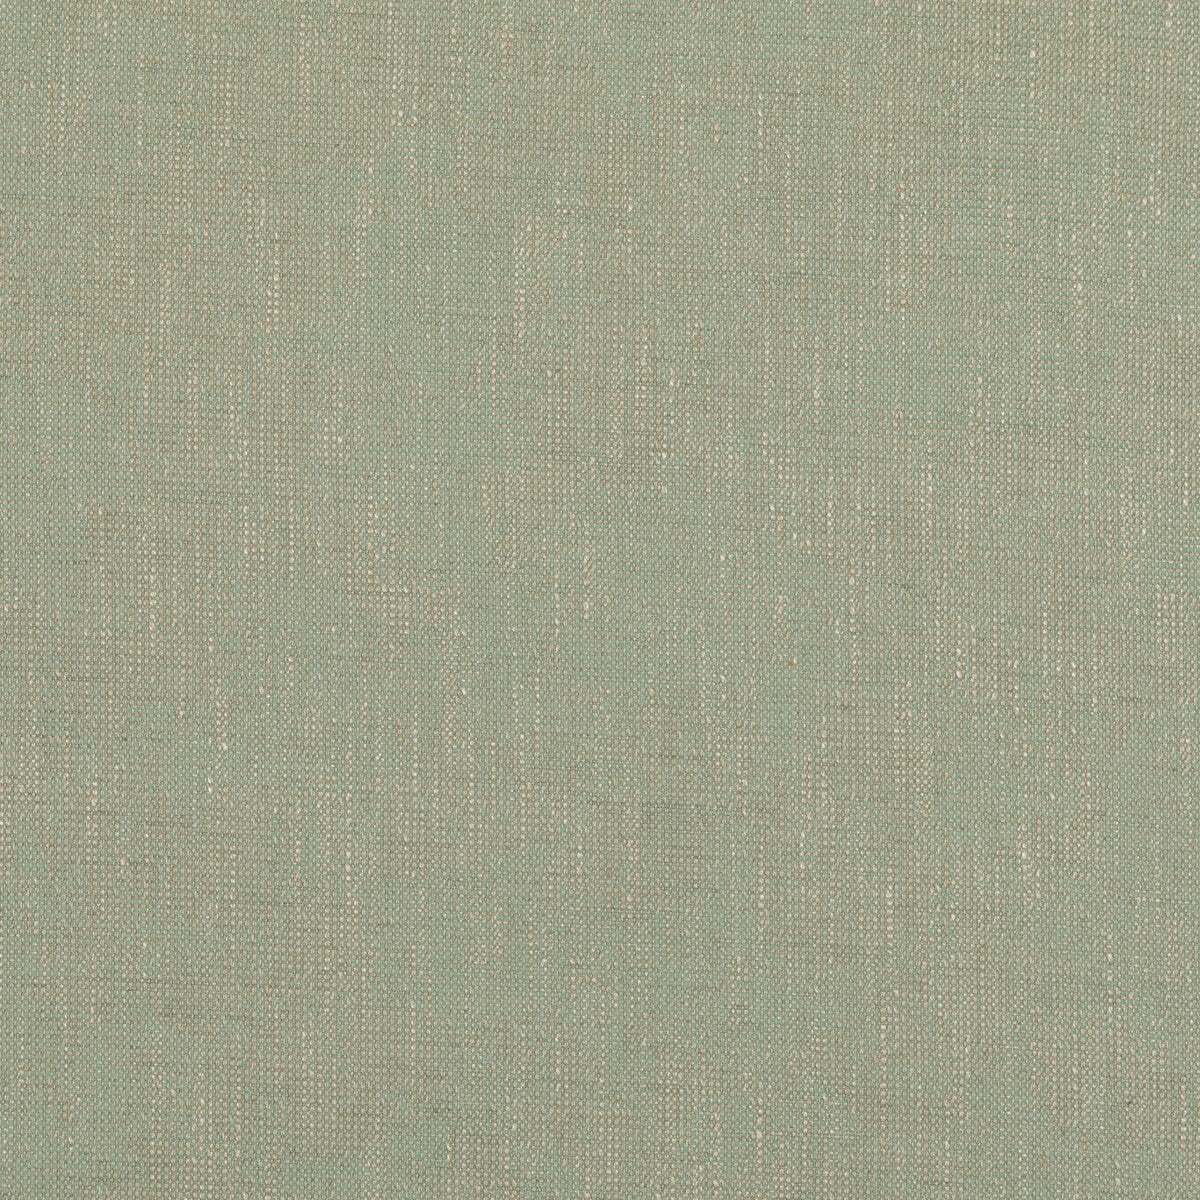 Bower fabric in soft aqua color - pattern PF50489.715.0 - by Baker Lifestyle in the Block Weaves collection